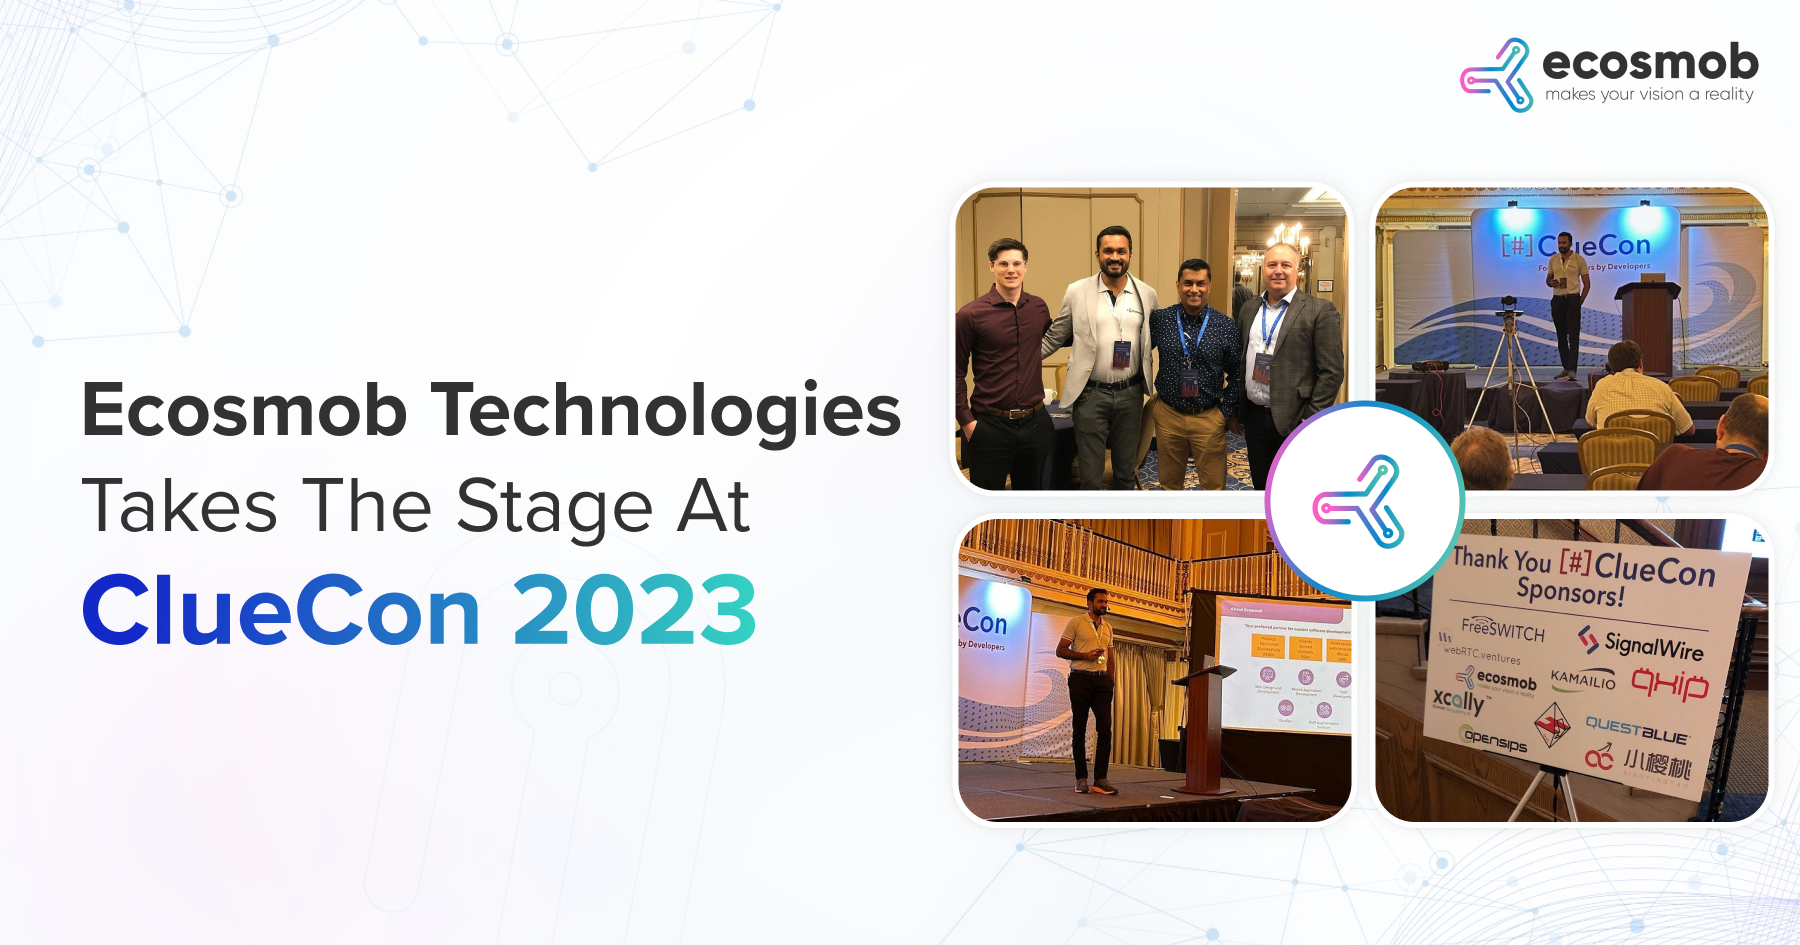 Ecosmob Technologies Takes The Stage At ClueCon 2023